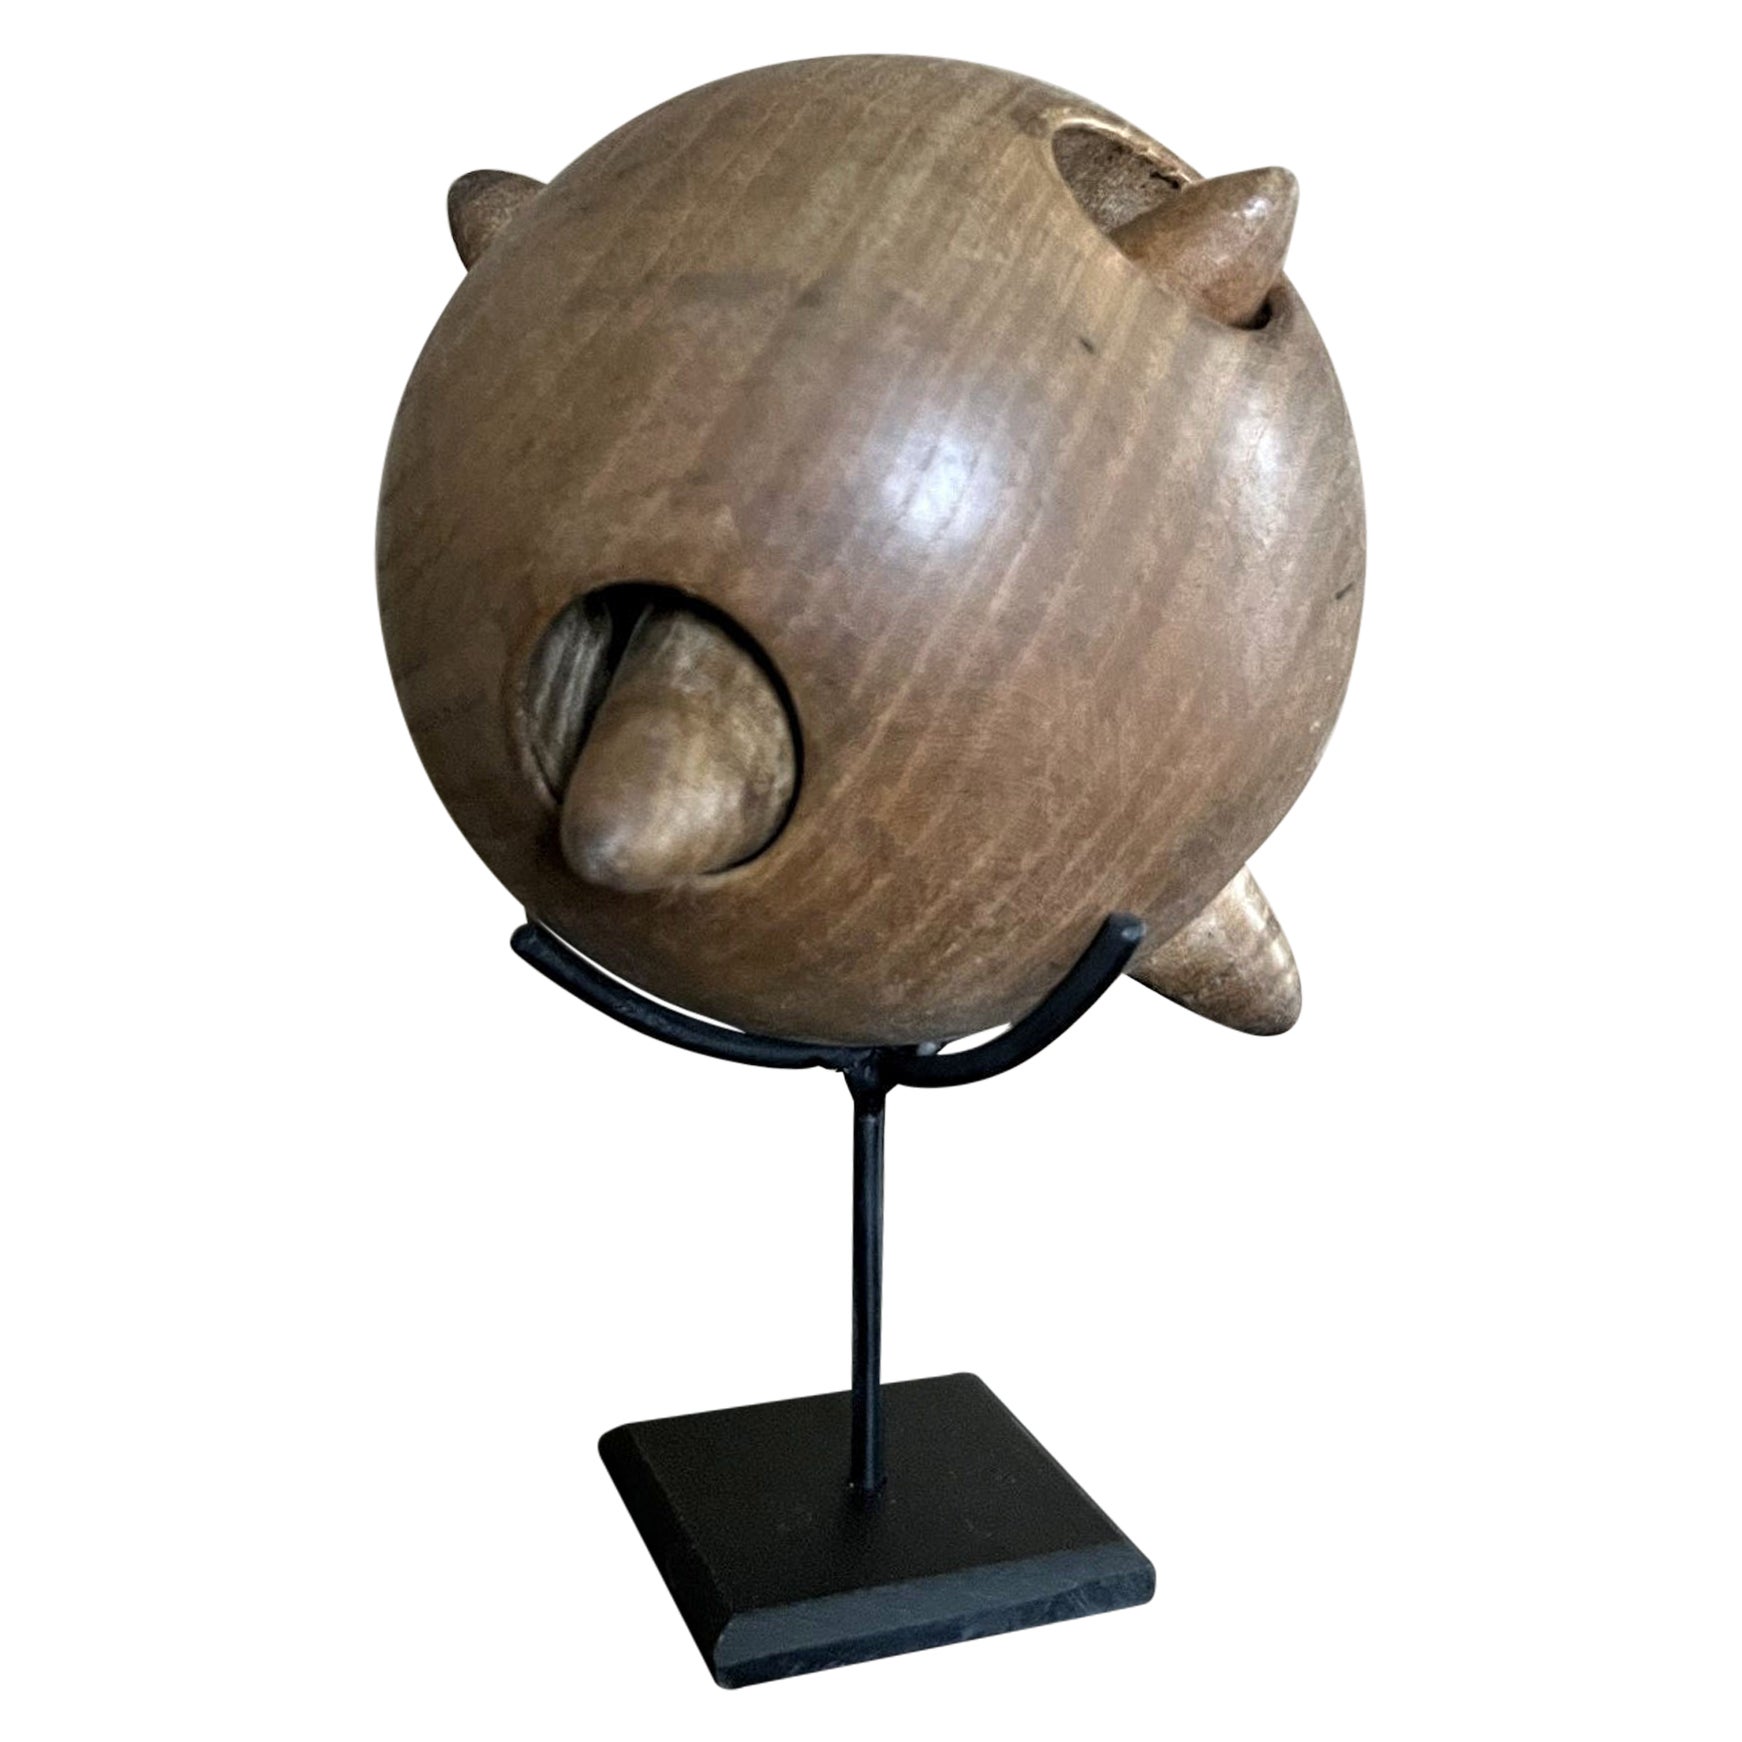 Early 20th Century, Open Turned Wooden Sphere Canton Ball For Sale